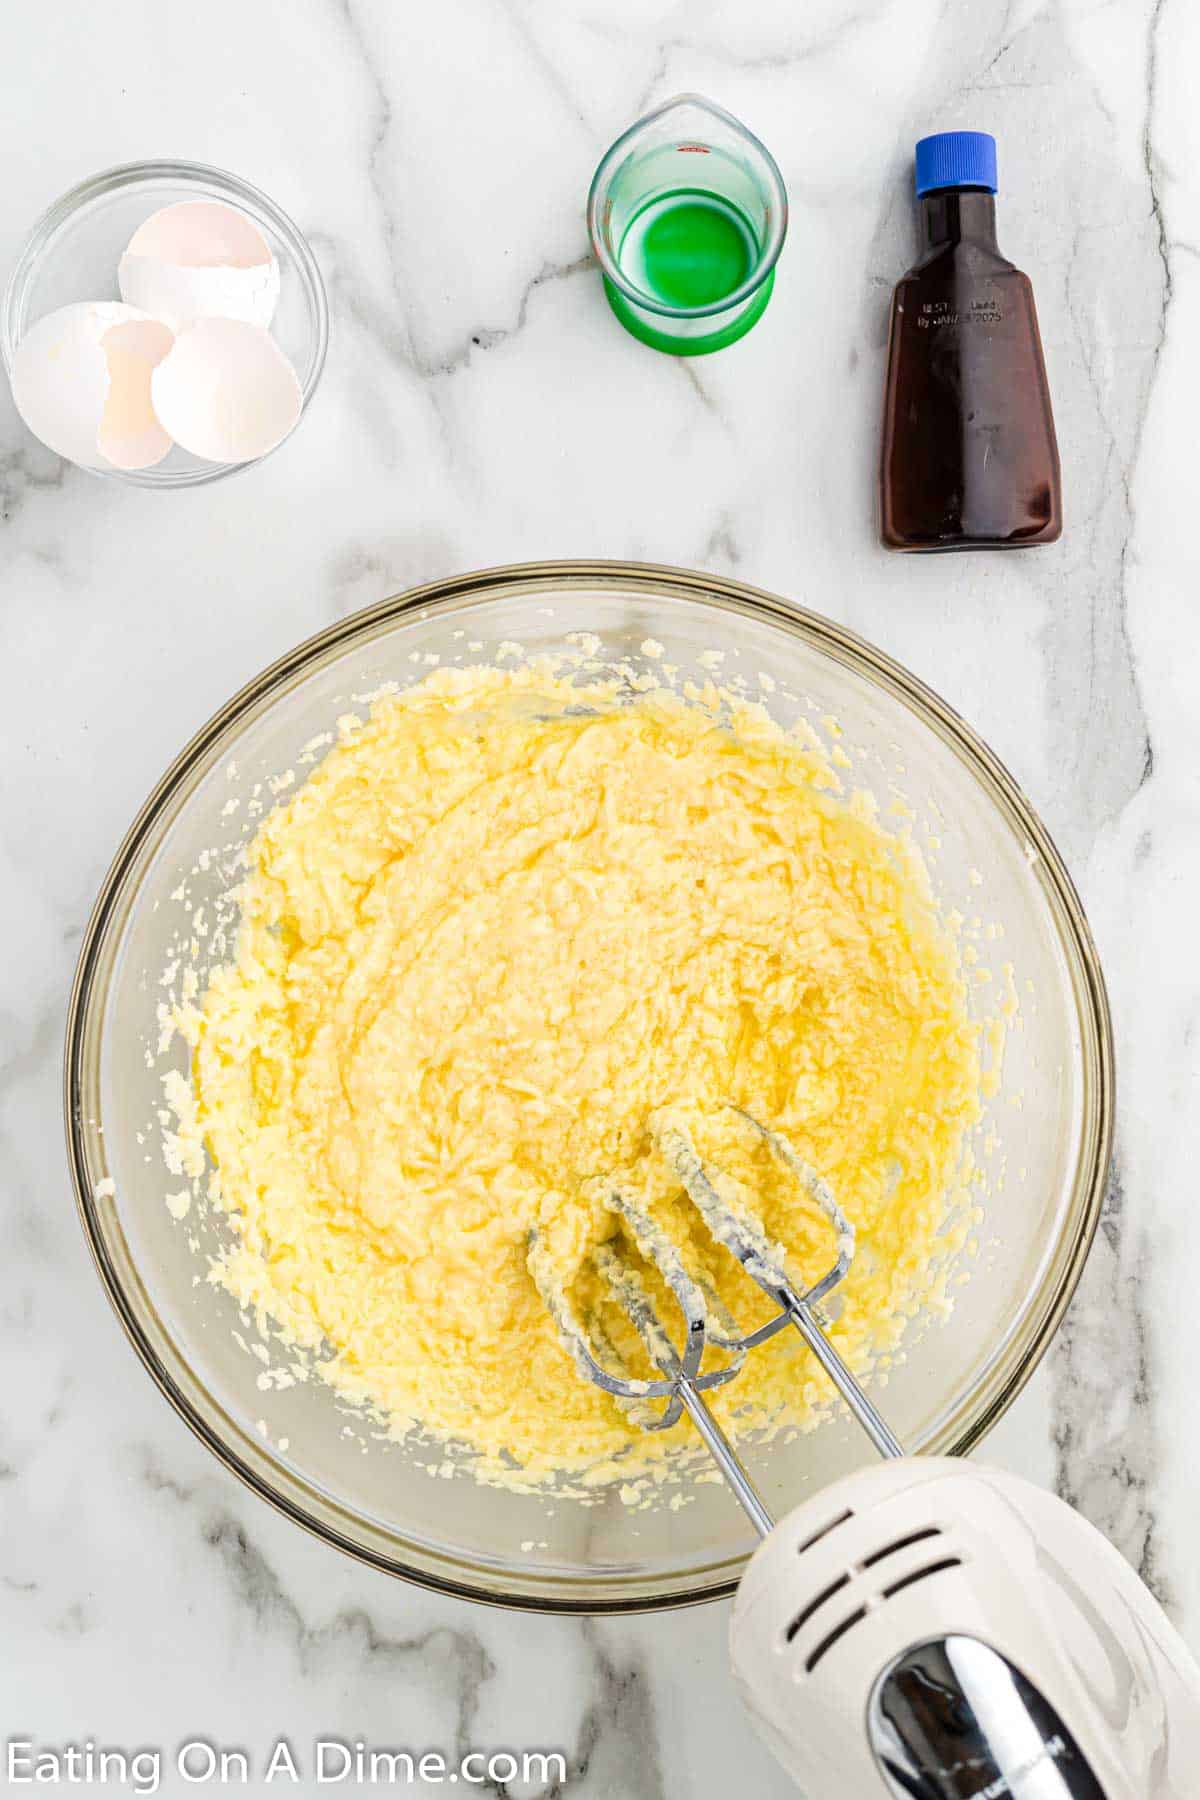 Beat together in butter and sugar in a bowl. Then mixing in eggs, milk and vanilla